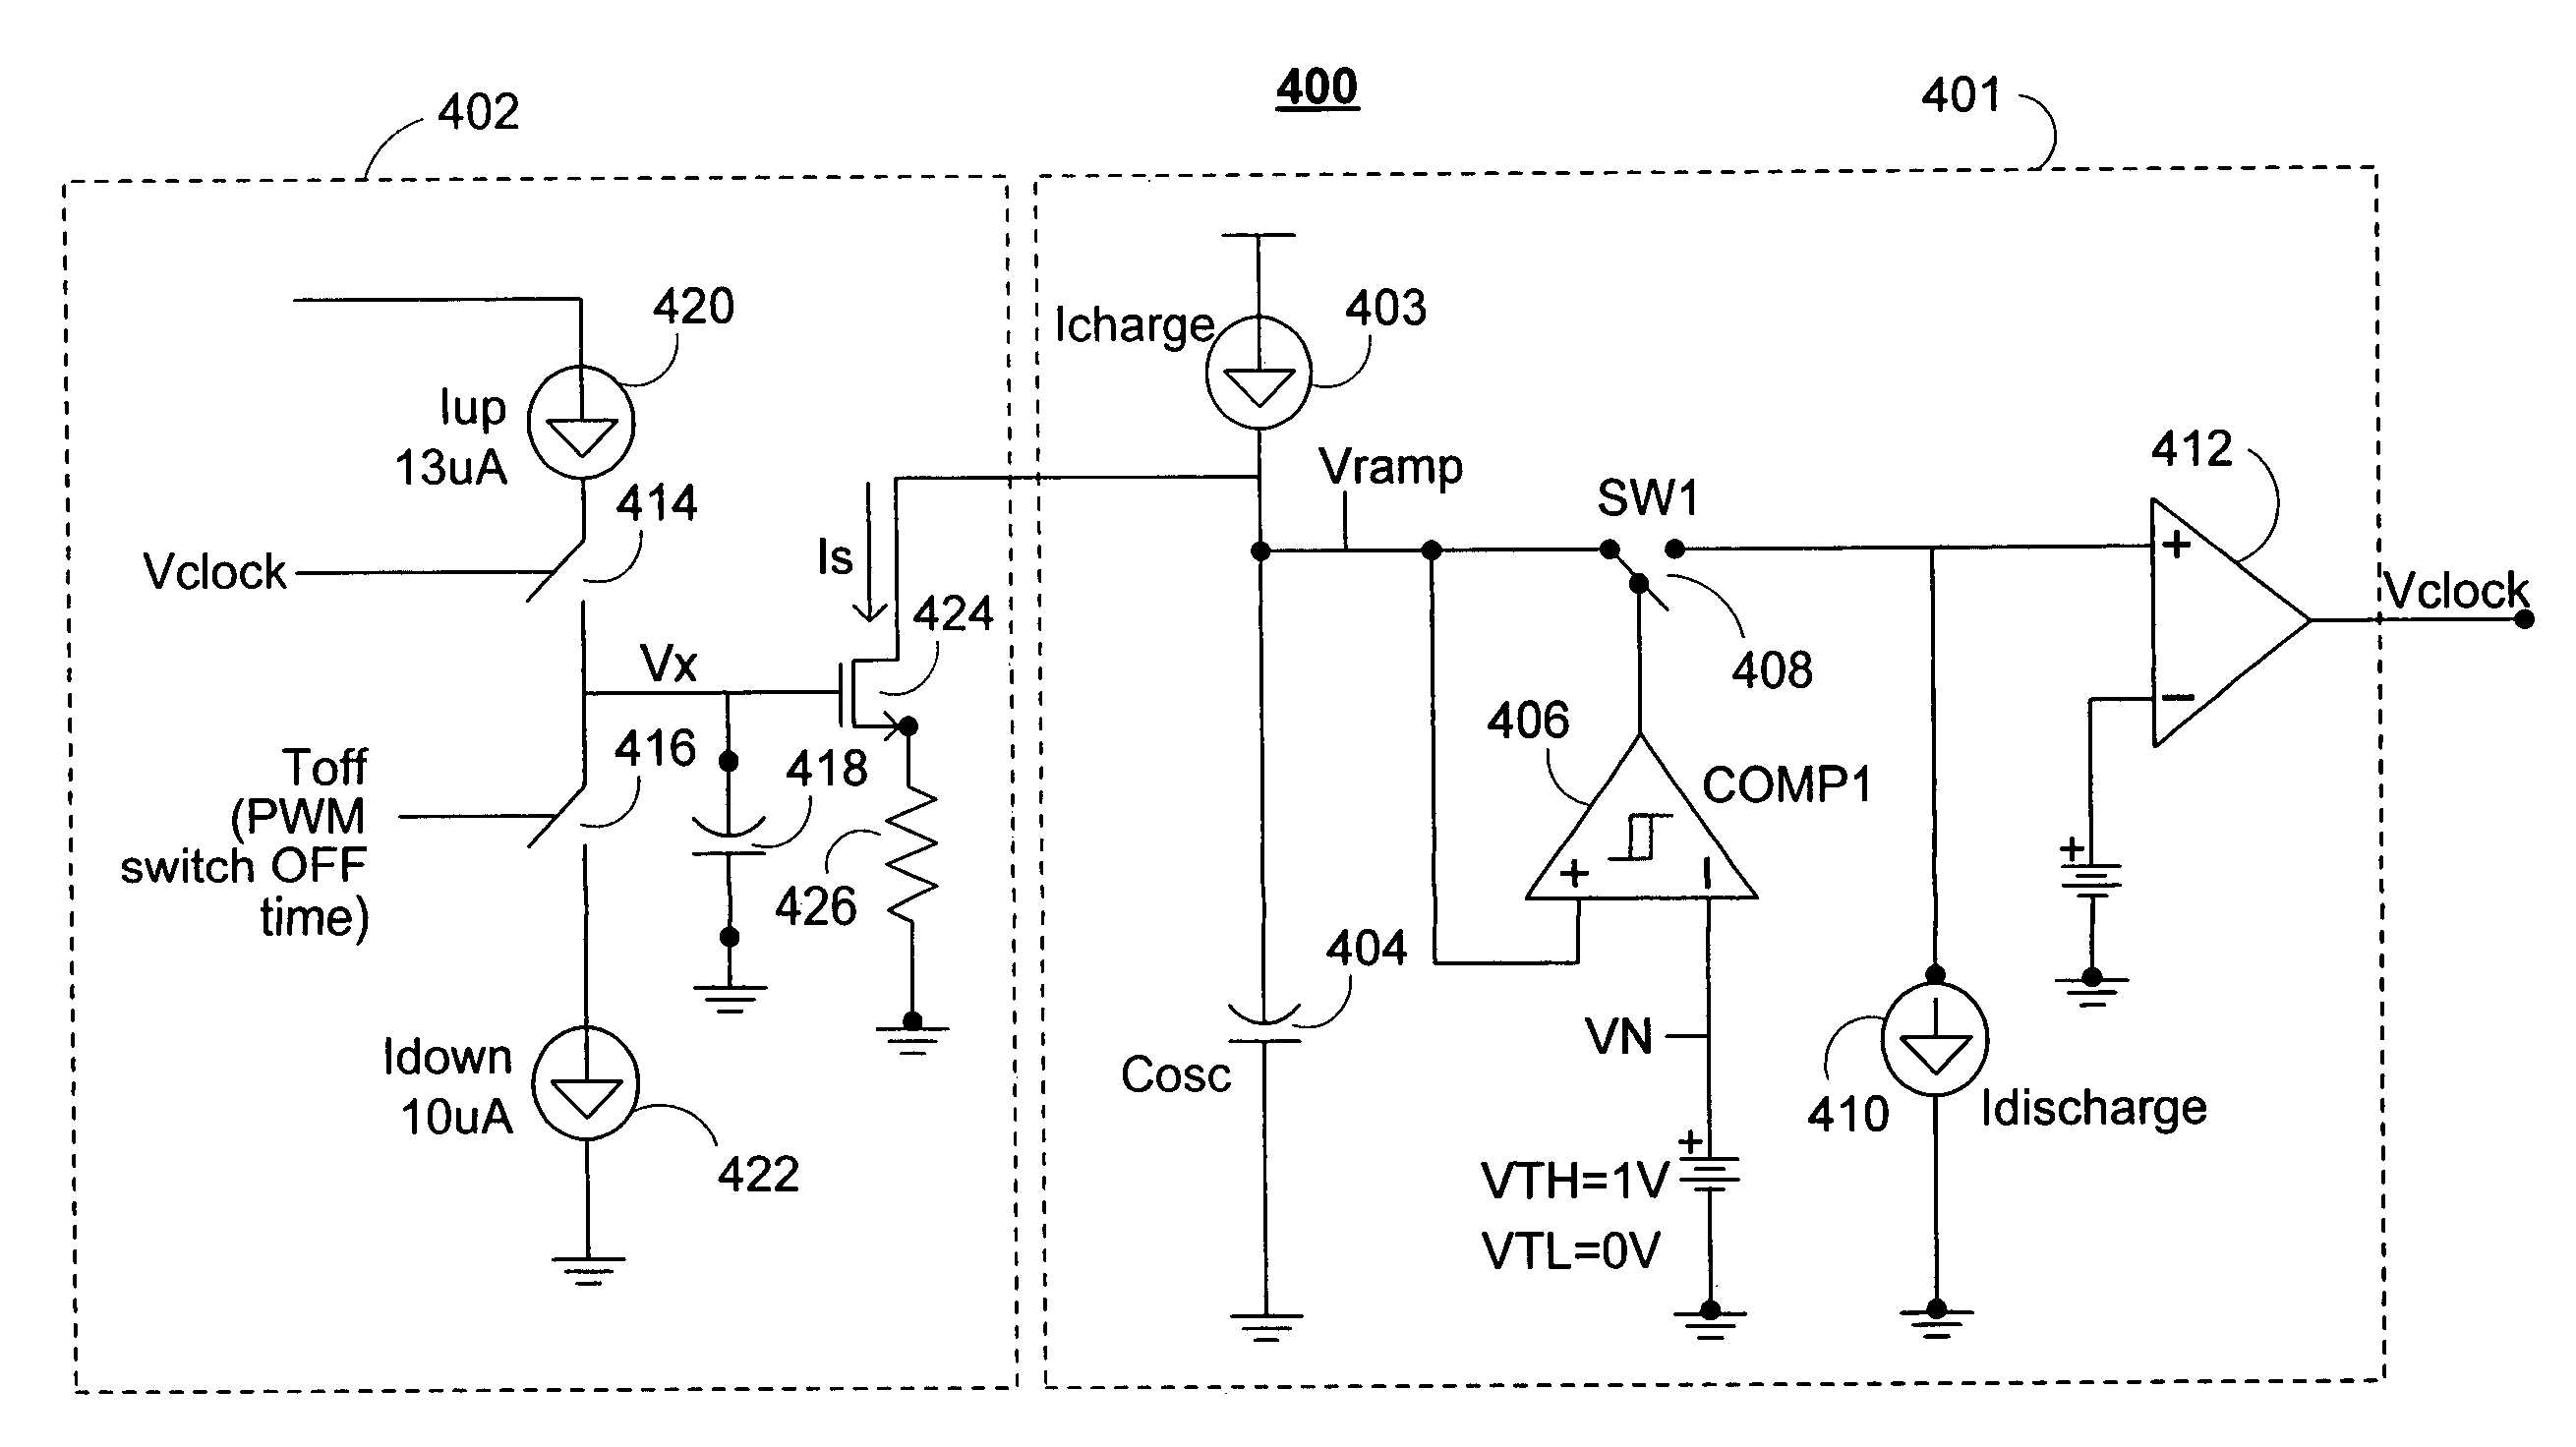 Switching regulator duty cycle control in a fixed frequency operation